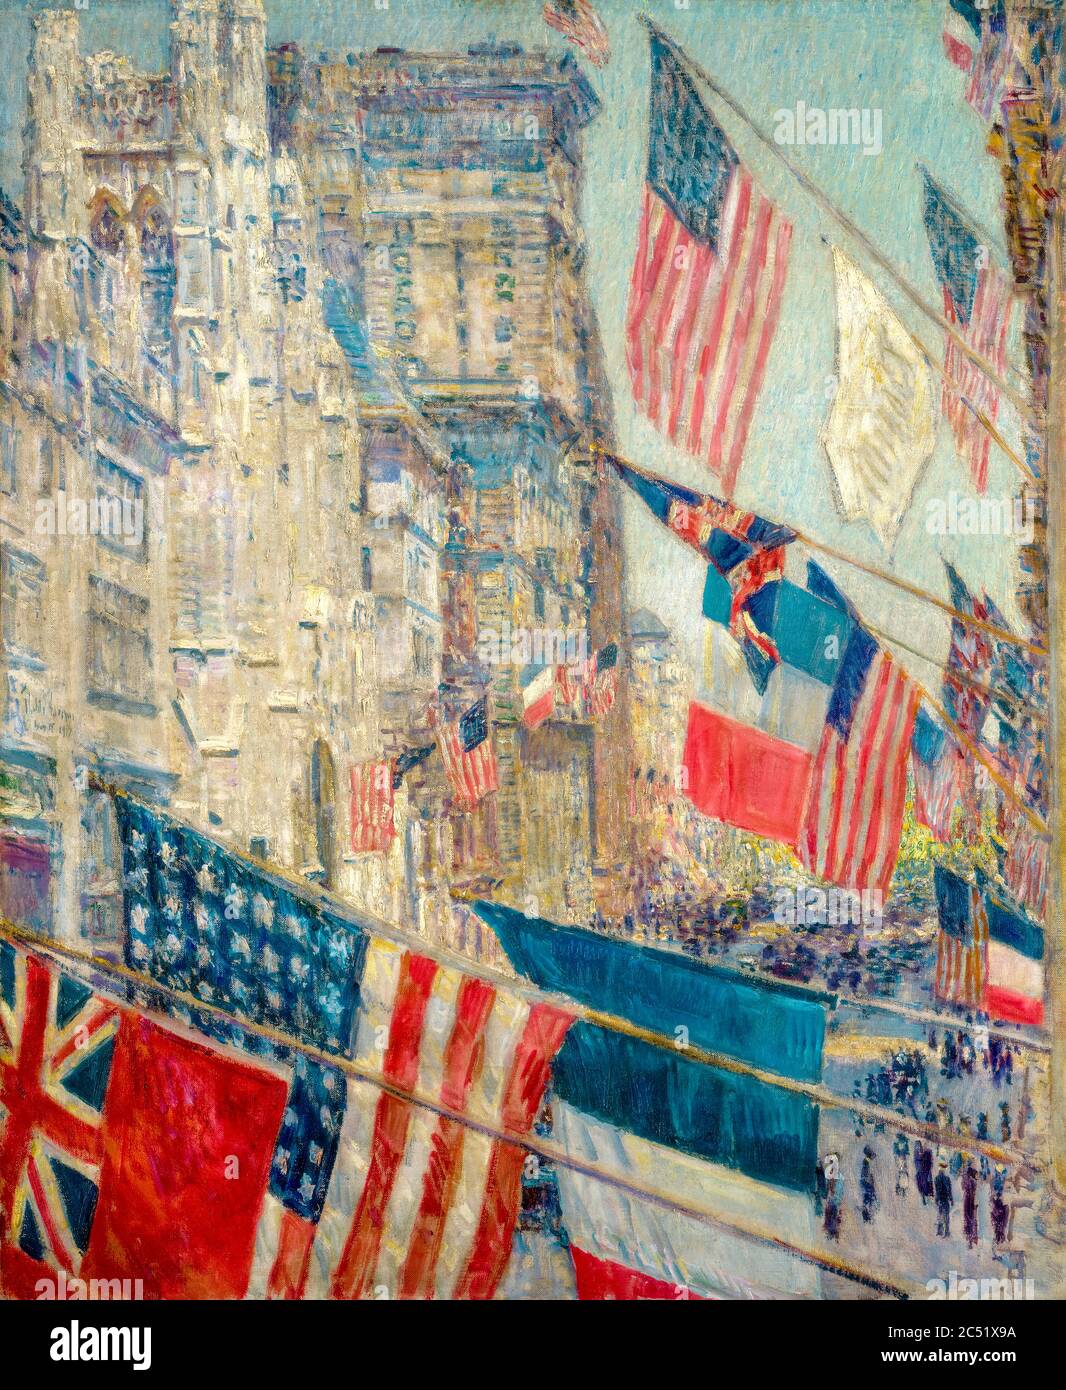 Childe Hassam, Allies Day, May 1917, painting, 1917 Stock Photo